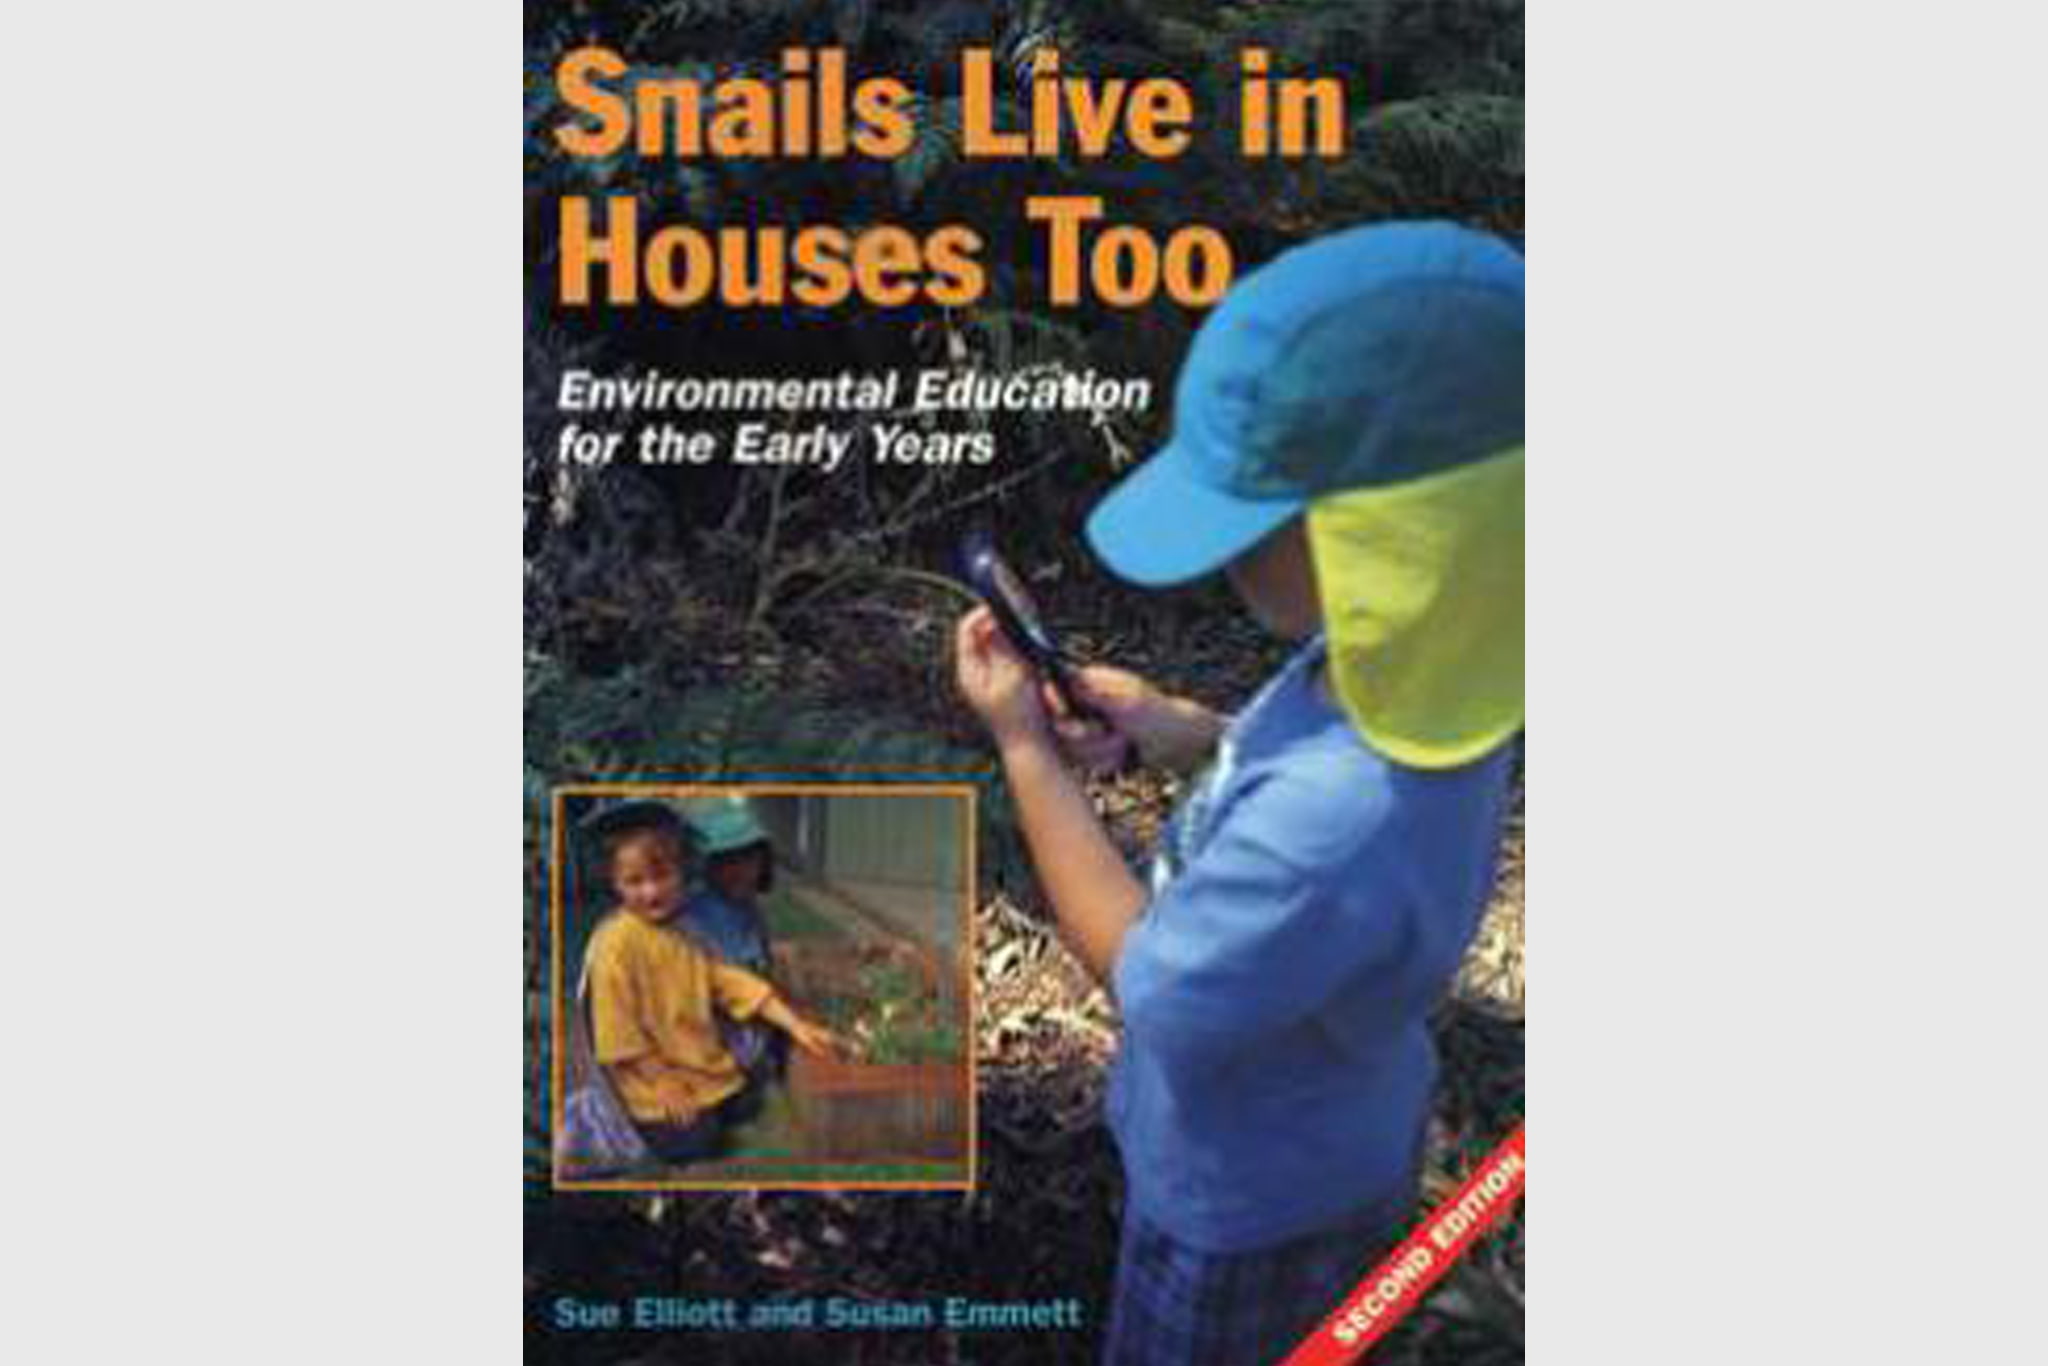 Snails live in houses too book cover